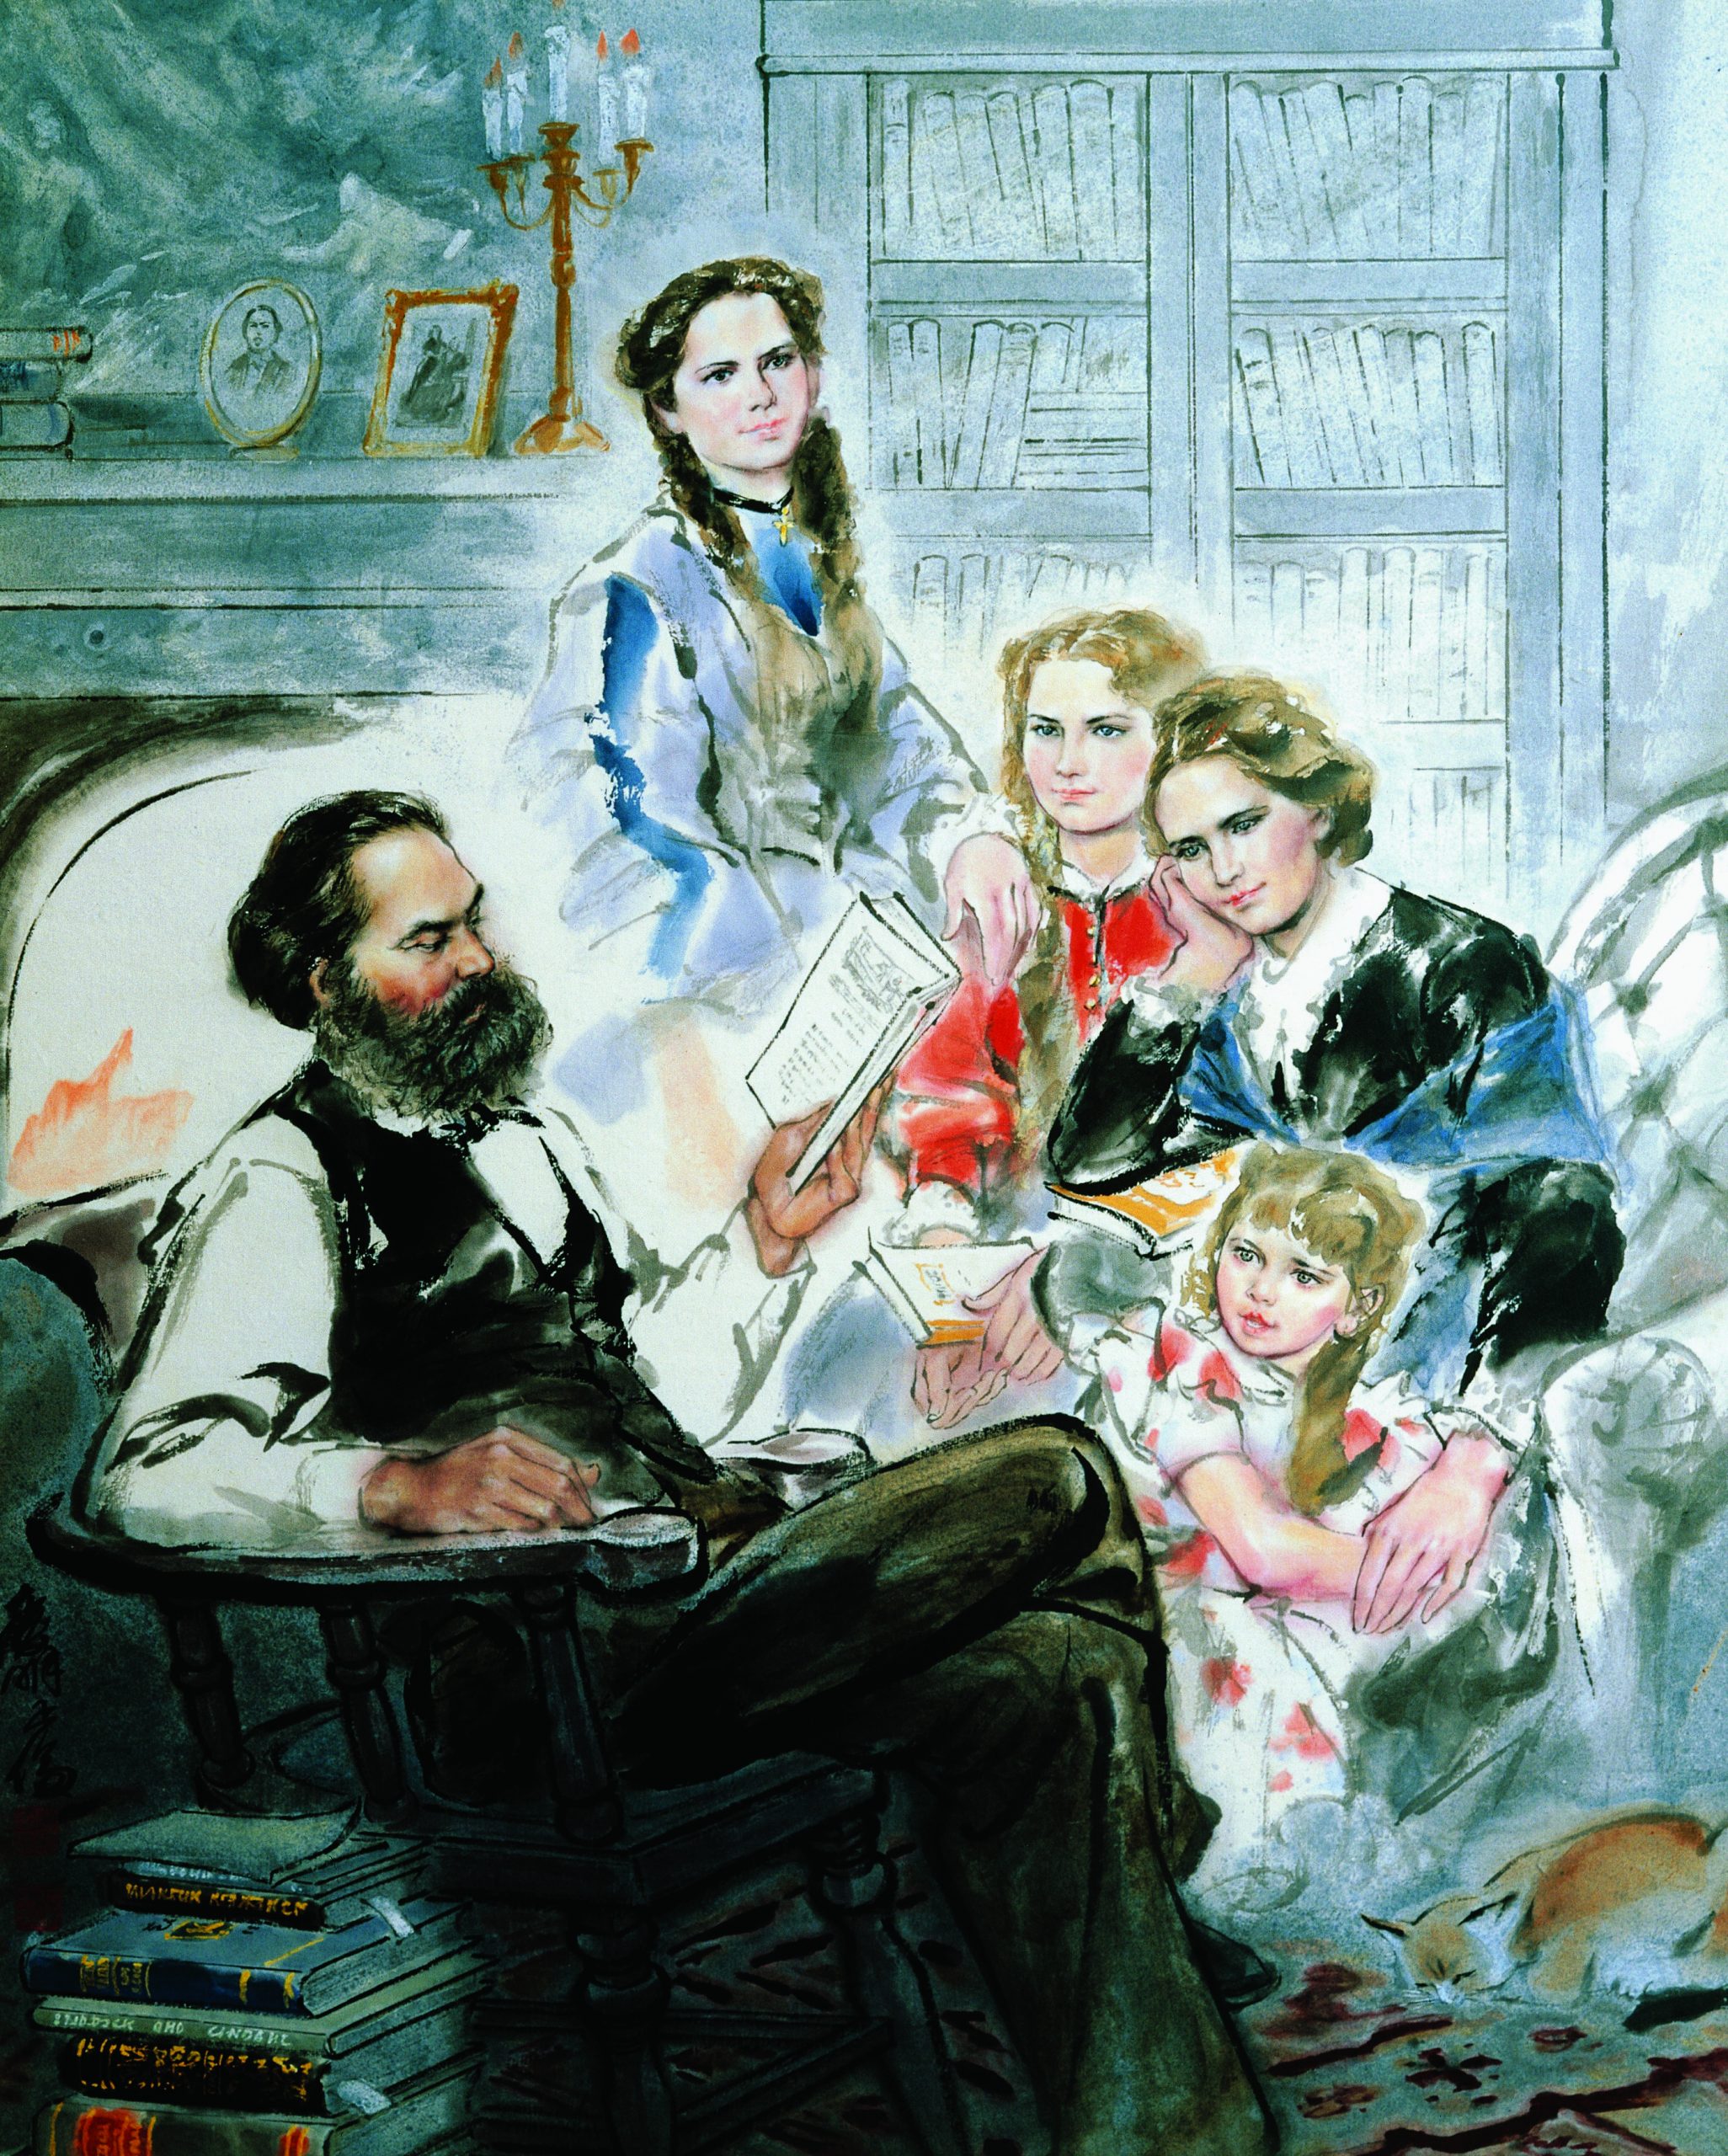 Water color of Karl Marx with his family by Ghan Zen, Ghetty Images